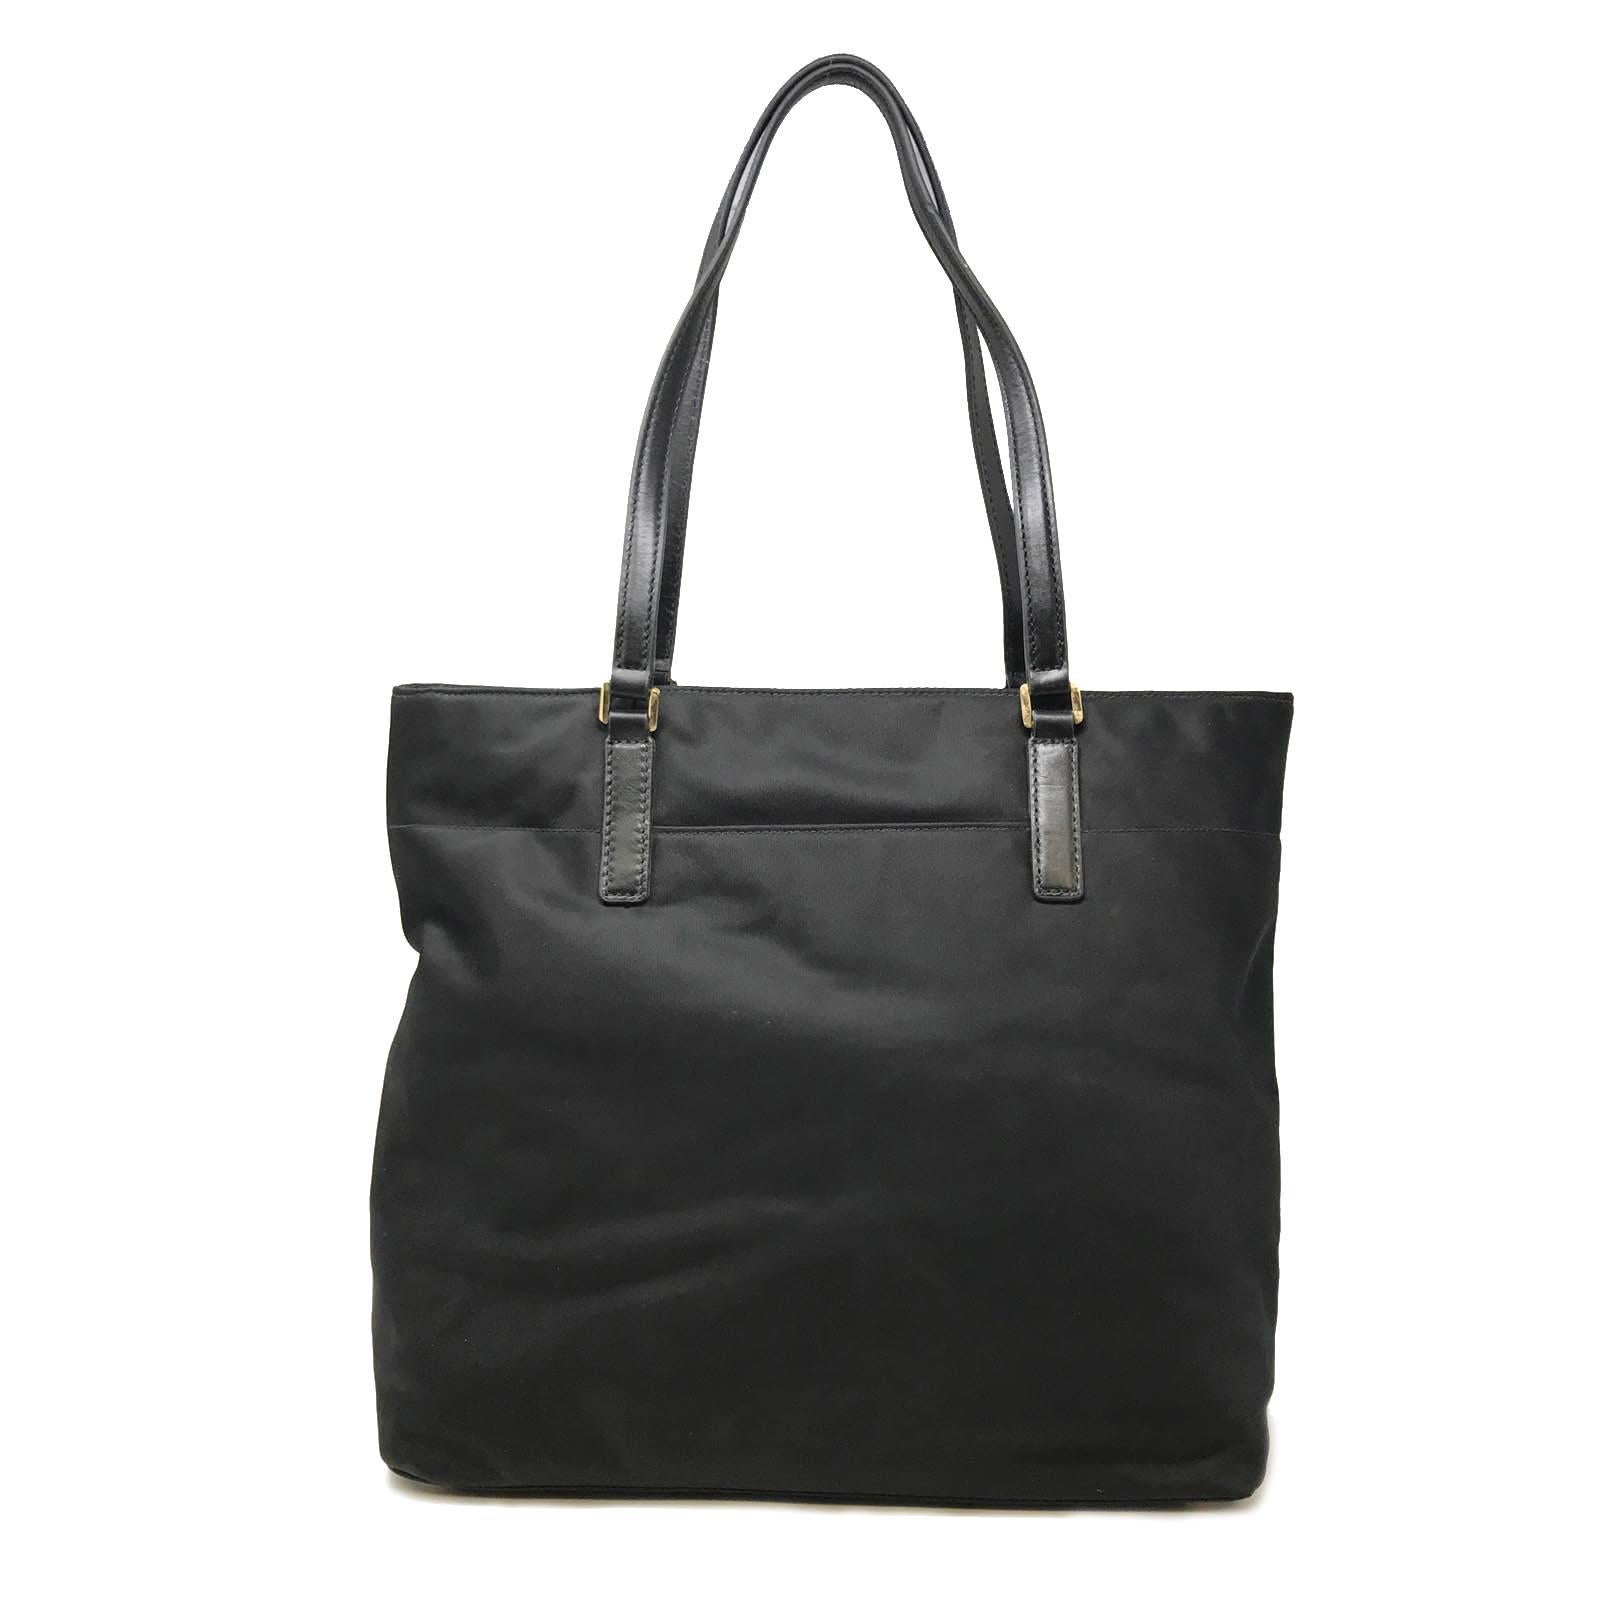 Pre-owned like new women/s bag  have no flaws just some small color marks which is approx not visible.

Sandy beaches and warm-weather locales call for a durable tote. Meet our Morgan, a smart and functional nylon bag able to withstand all the